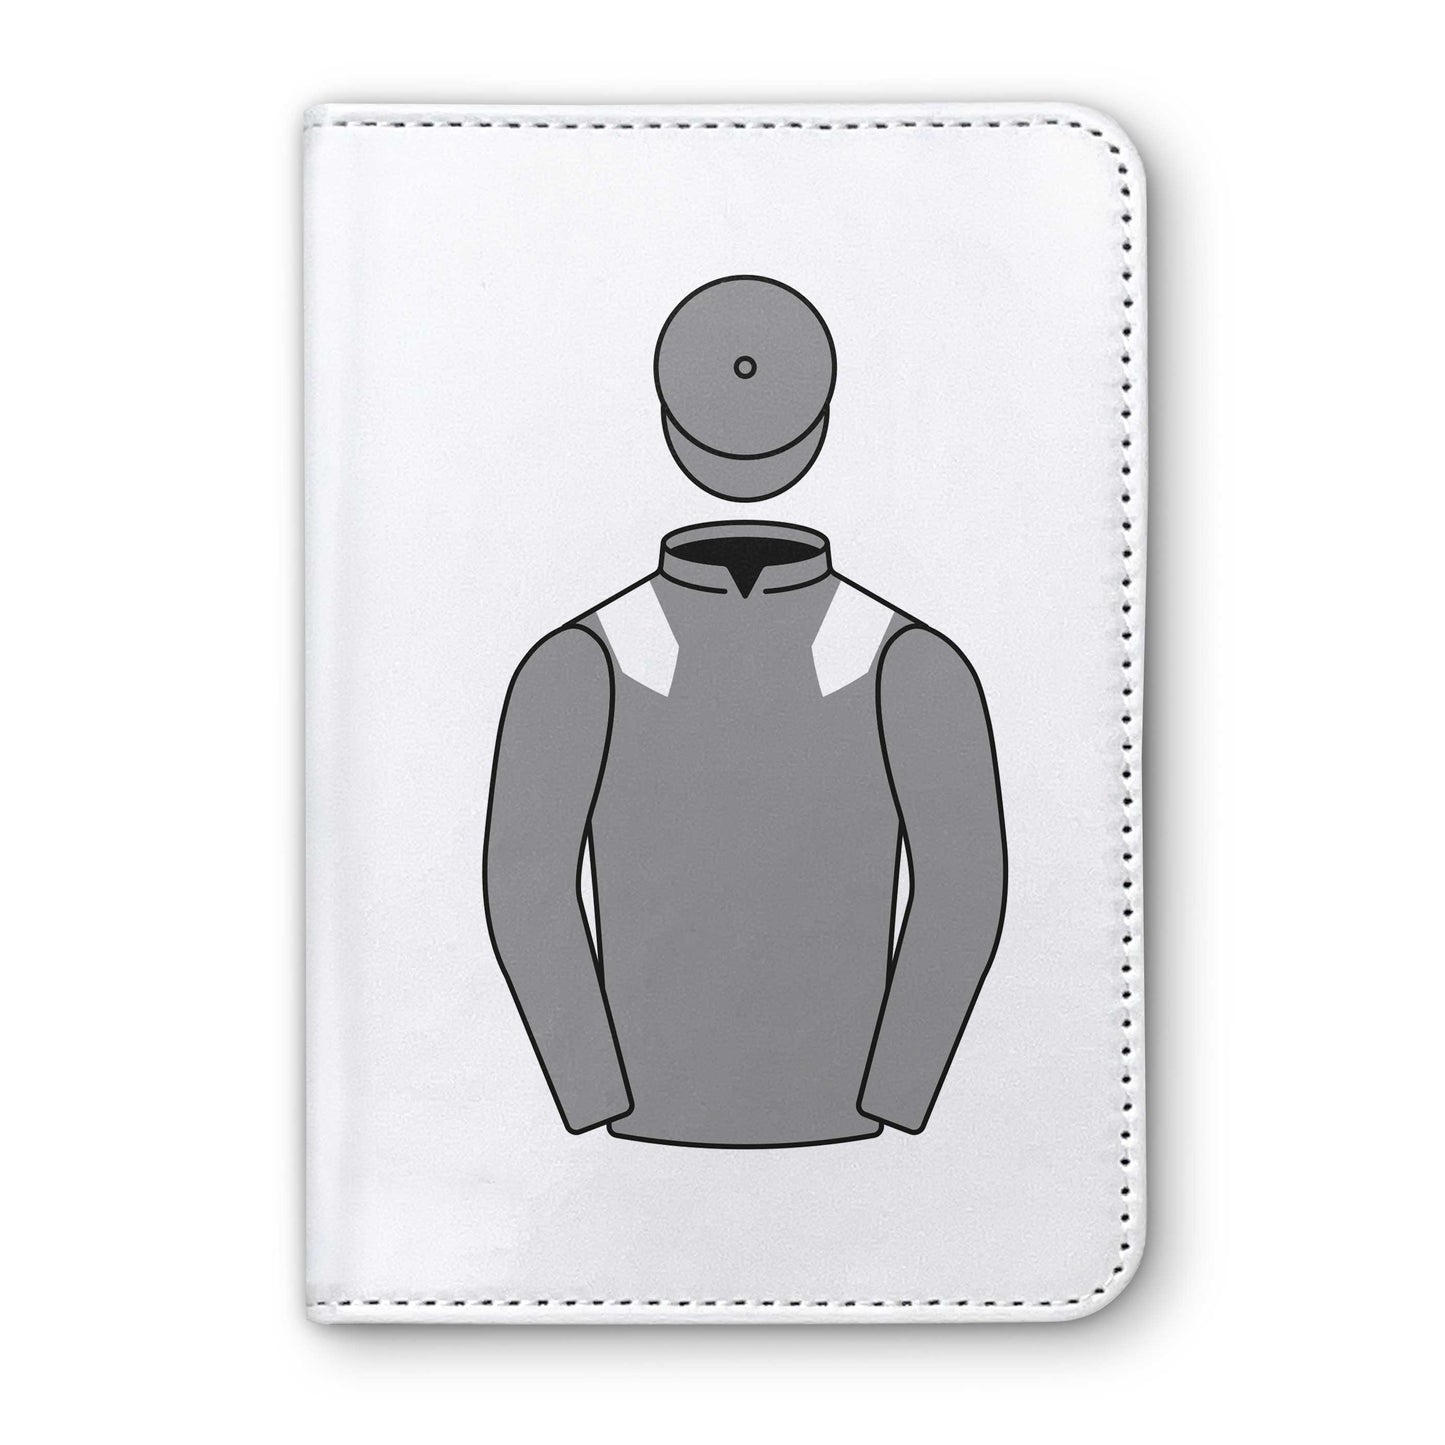 Mr And Mrs R Kelvin-Hughes Horse Racing Passport Holder - Hacked Up Horse Racing Gifts